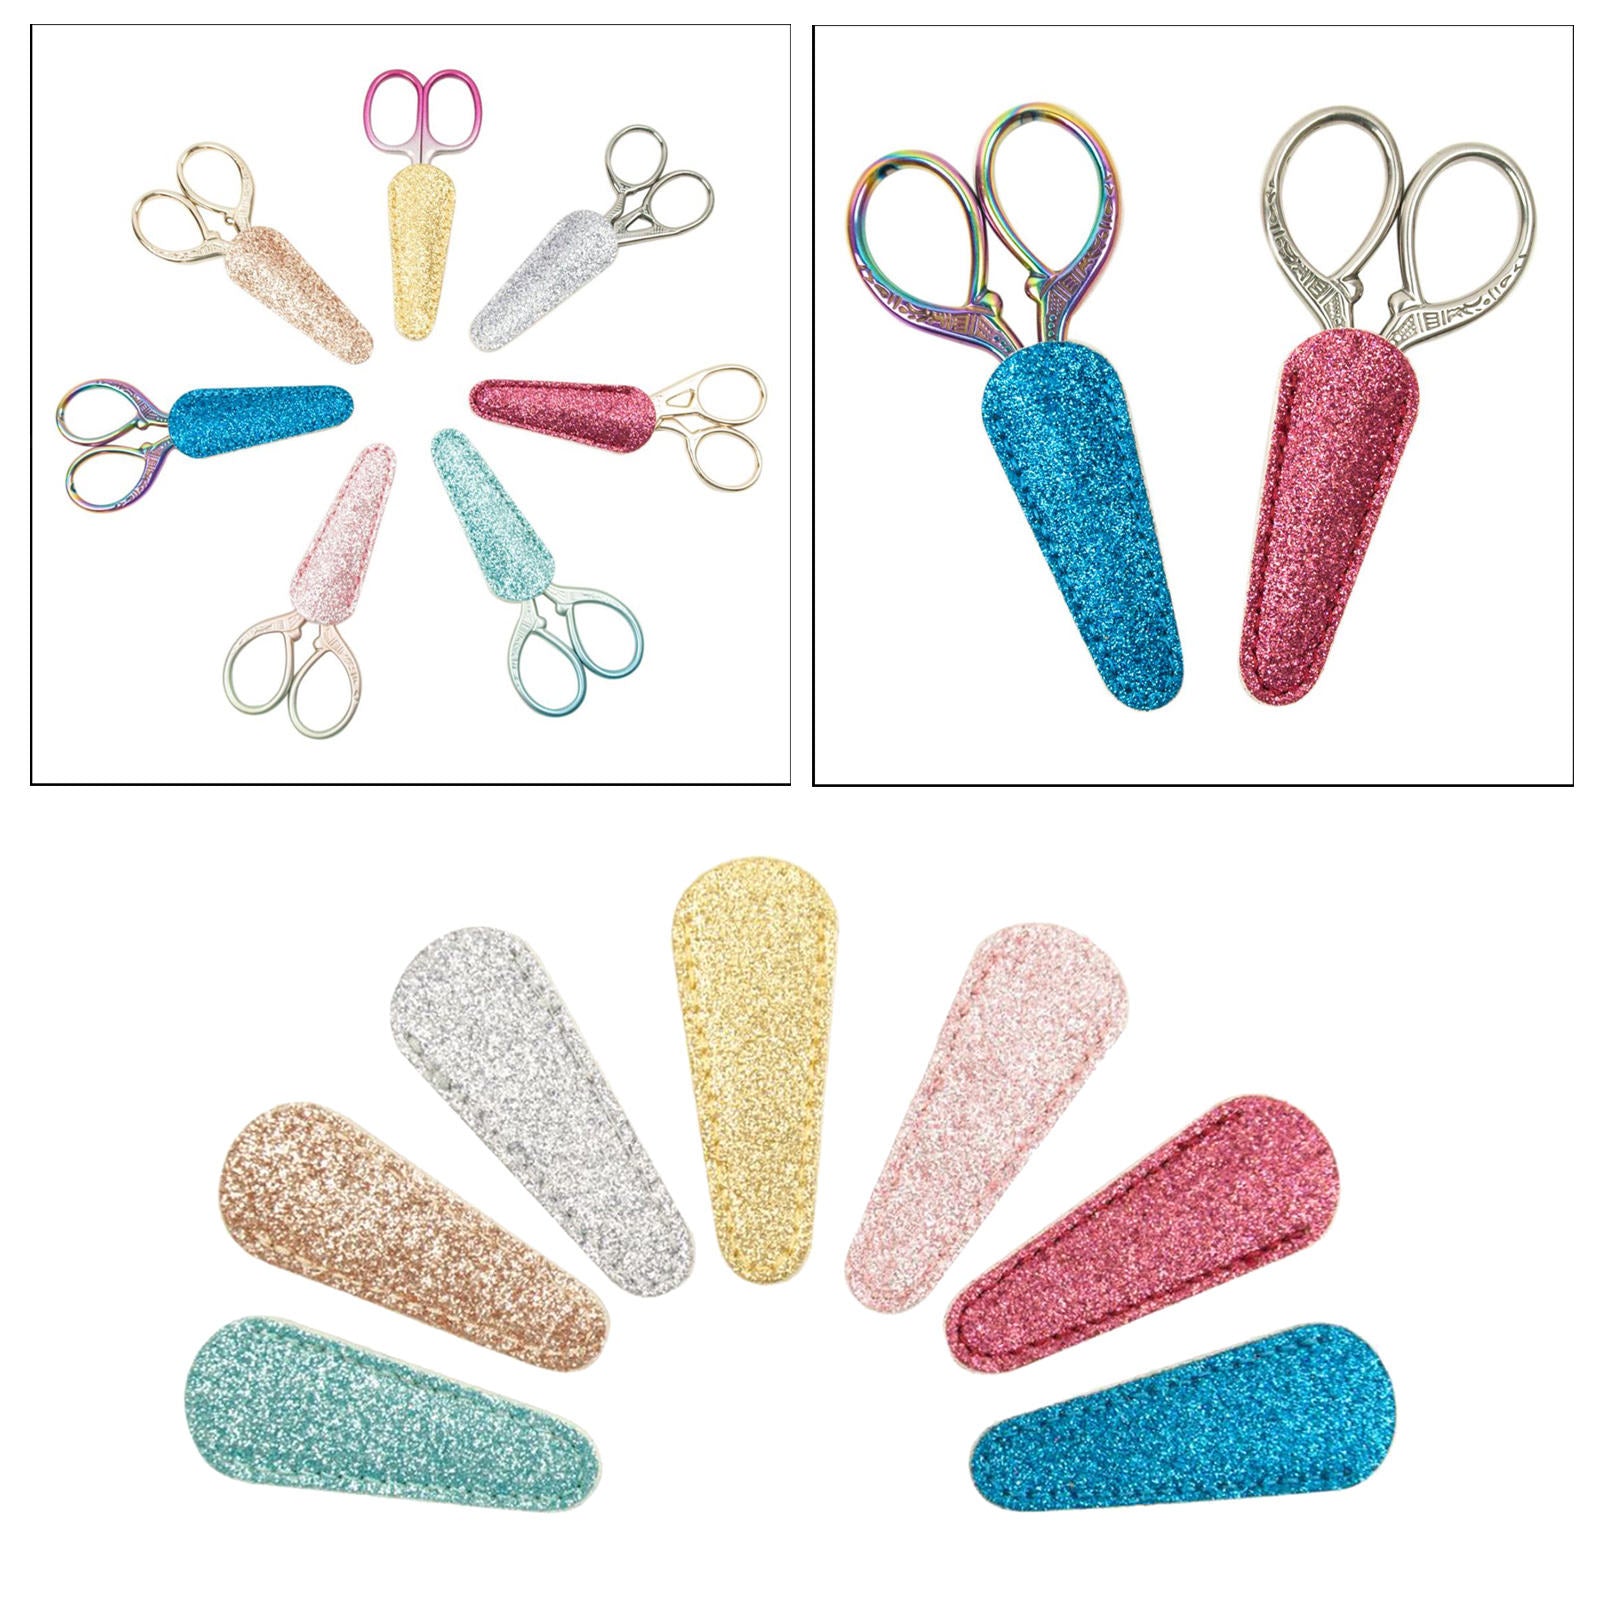 7x Embroidery Scissors Sheath Covers Sewing Protector Cover Holder Bags Case